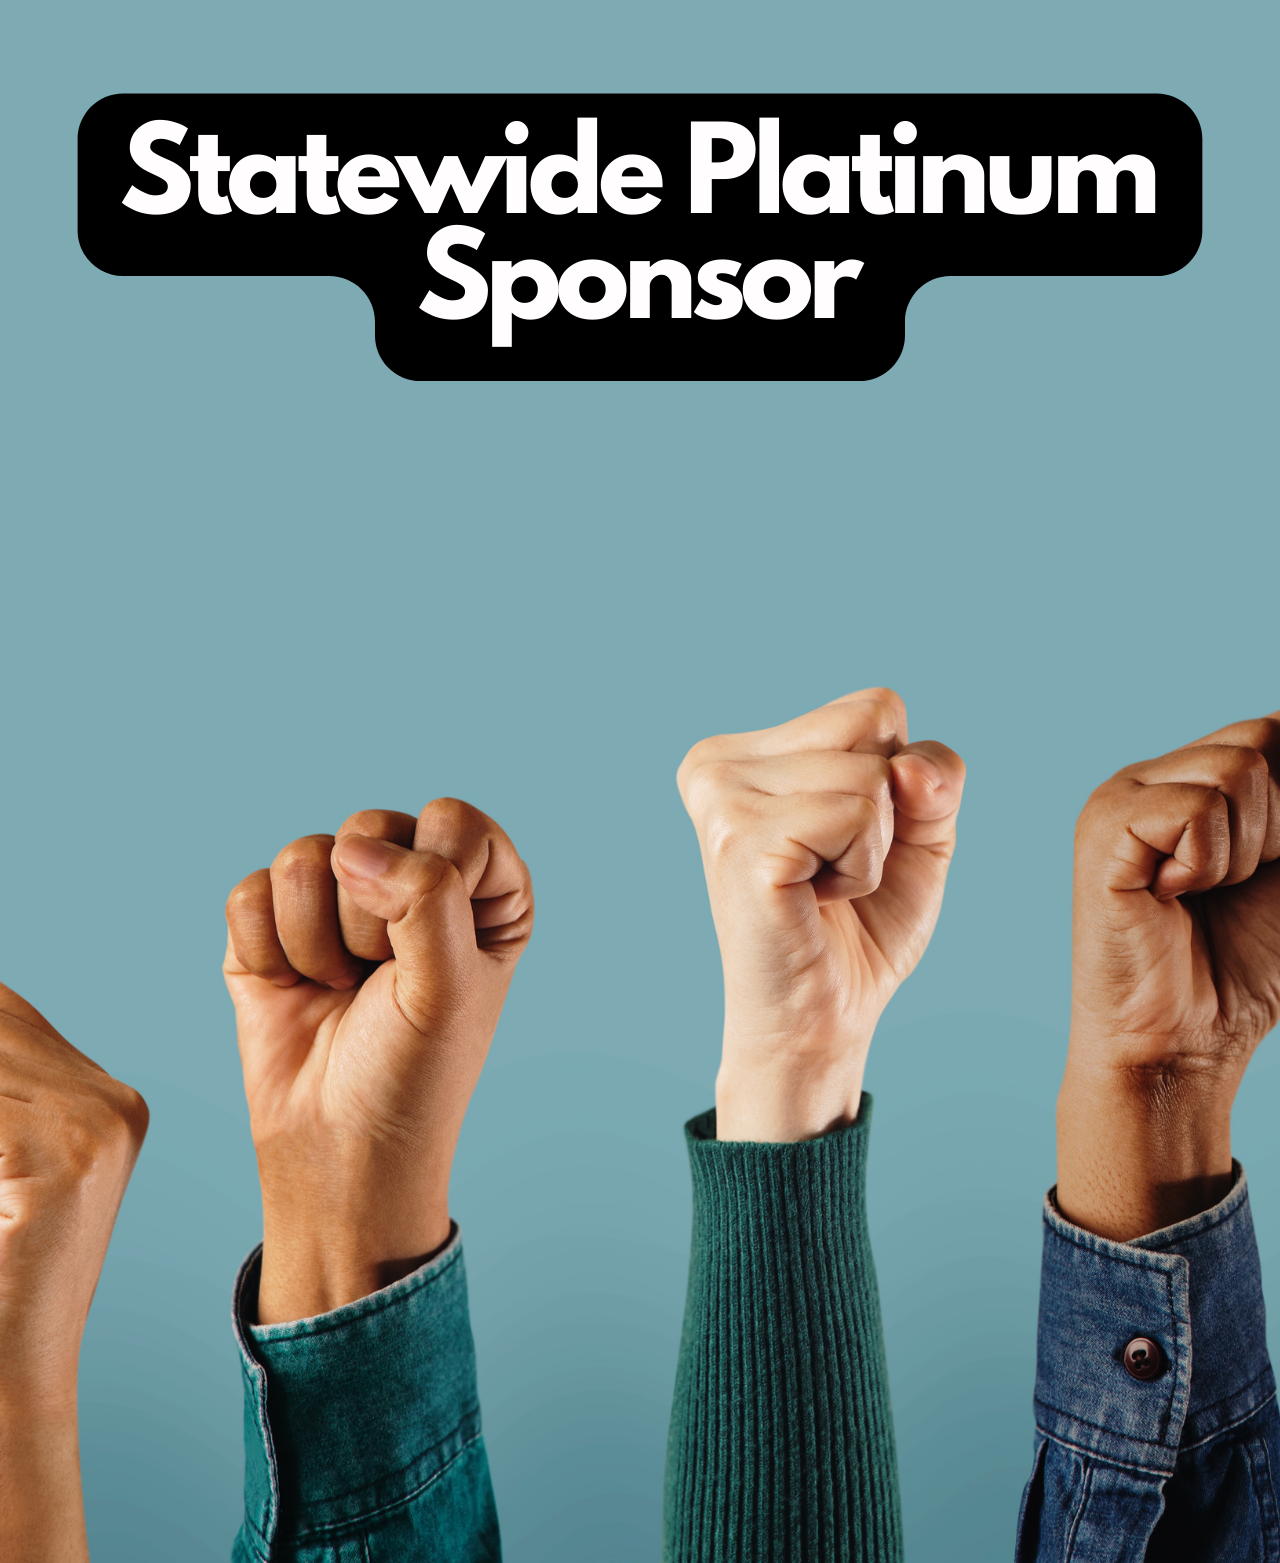 $100,000  •	2024 Statewide Platinum Sponsorship • As a Platinum Sponsor, you will get naming rights for events throughout the state in 2024. Your logo will be displayed on our state website. Your organization’s name will be featured on  program & event materials throughout the state in 2024, and there will be a banner with your company’s name on stage during large conference events. As a Title Sponsor, you will receive all of the benefits of all other sponsorship levels:  Additionally, you will receive the following benefits:  Opportunity to make remarks at opening event sessions Video commercial during event breaks Name on printed materials and video media Breakout rooms with your name on it Logo inclusion with hyperlink on our website Co-branded T-shirts